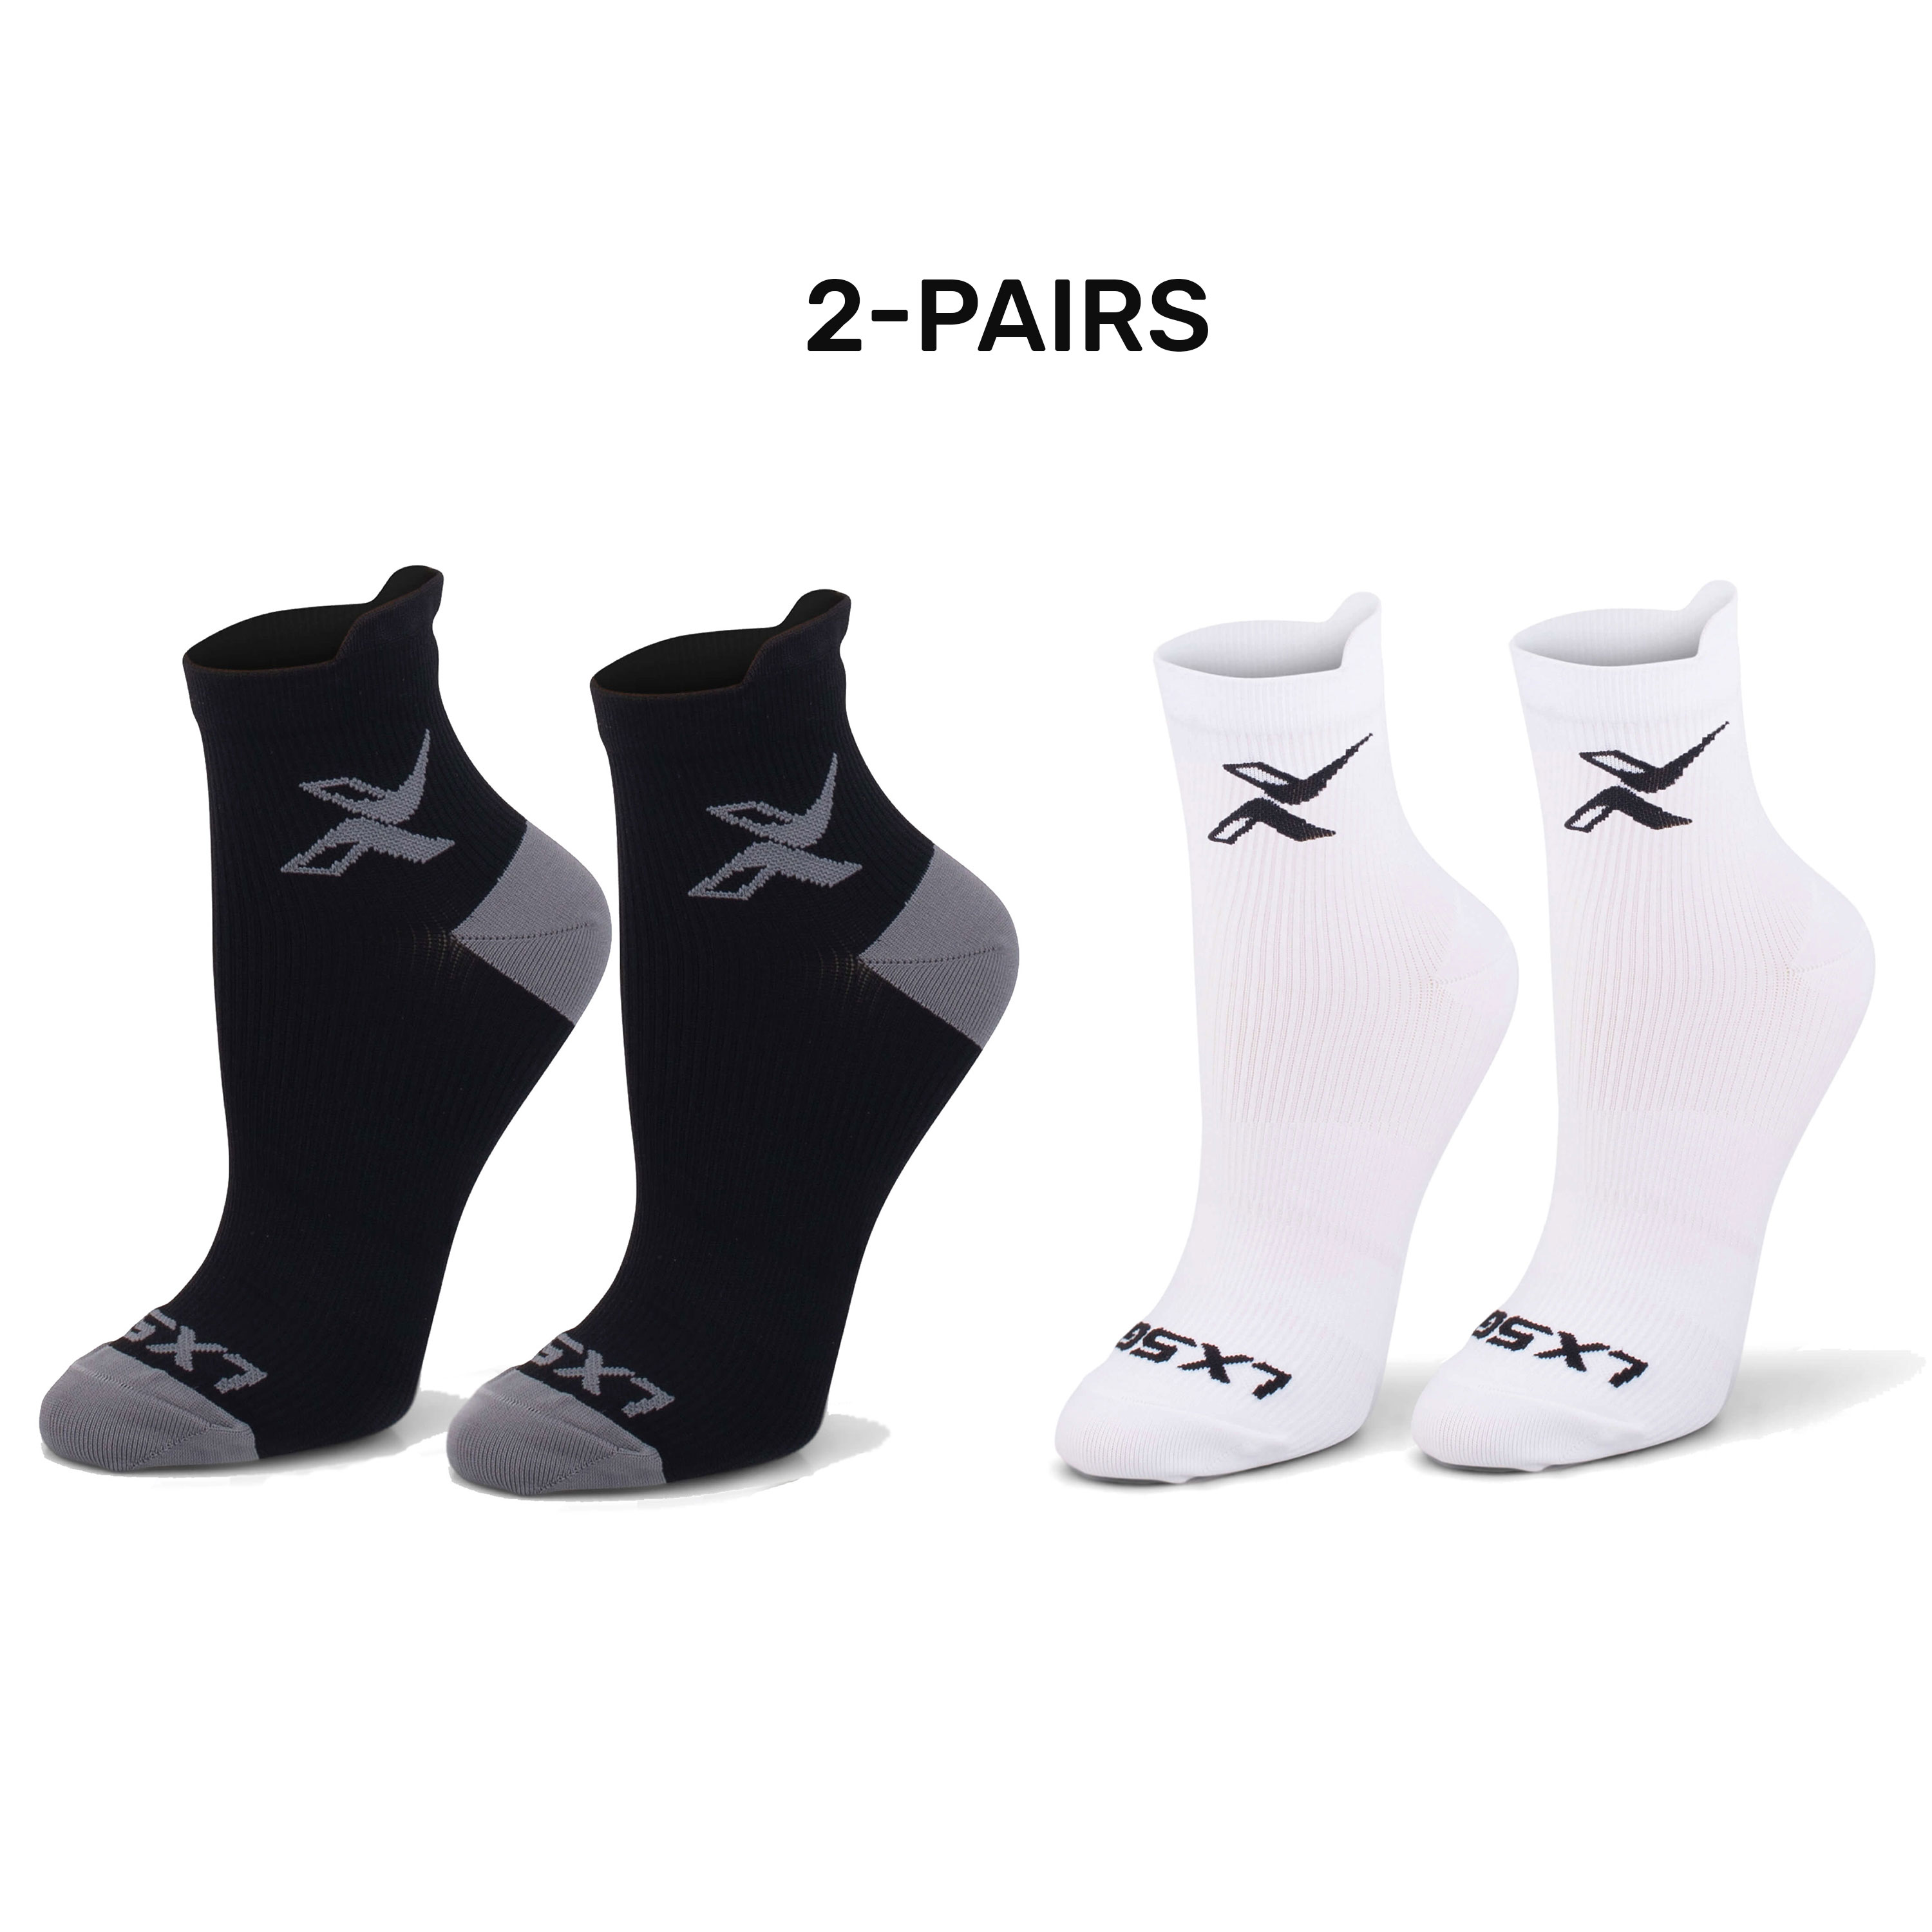 LxsGo ACTIVE Ankle Sport Compression Running Socks for Men & Women  - 2 Pairs Black and White in S/M and L/XL $2.5